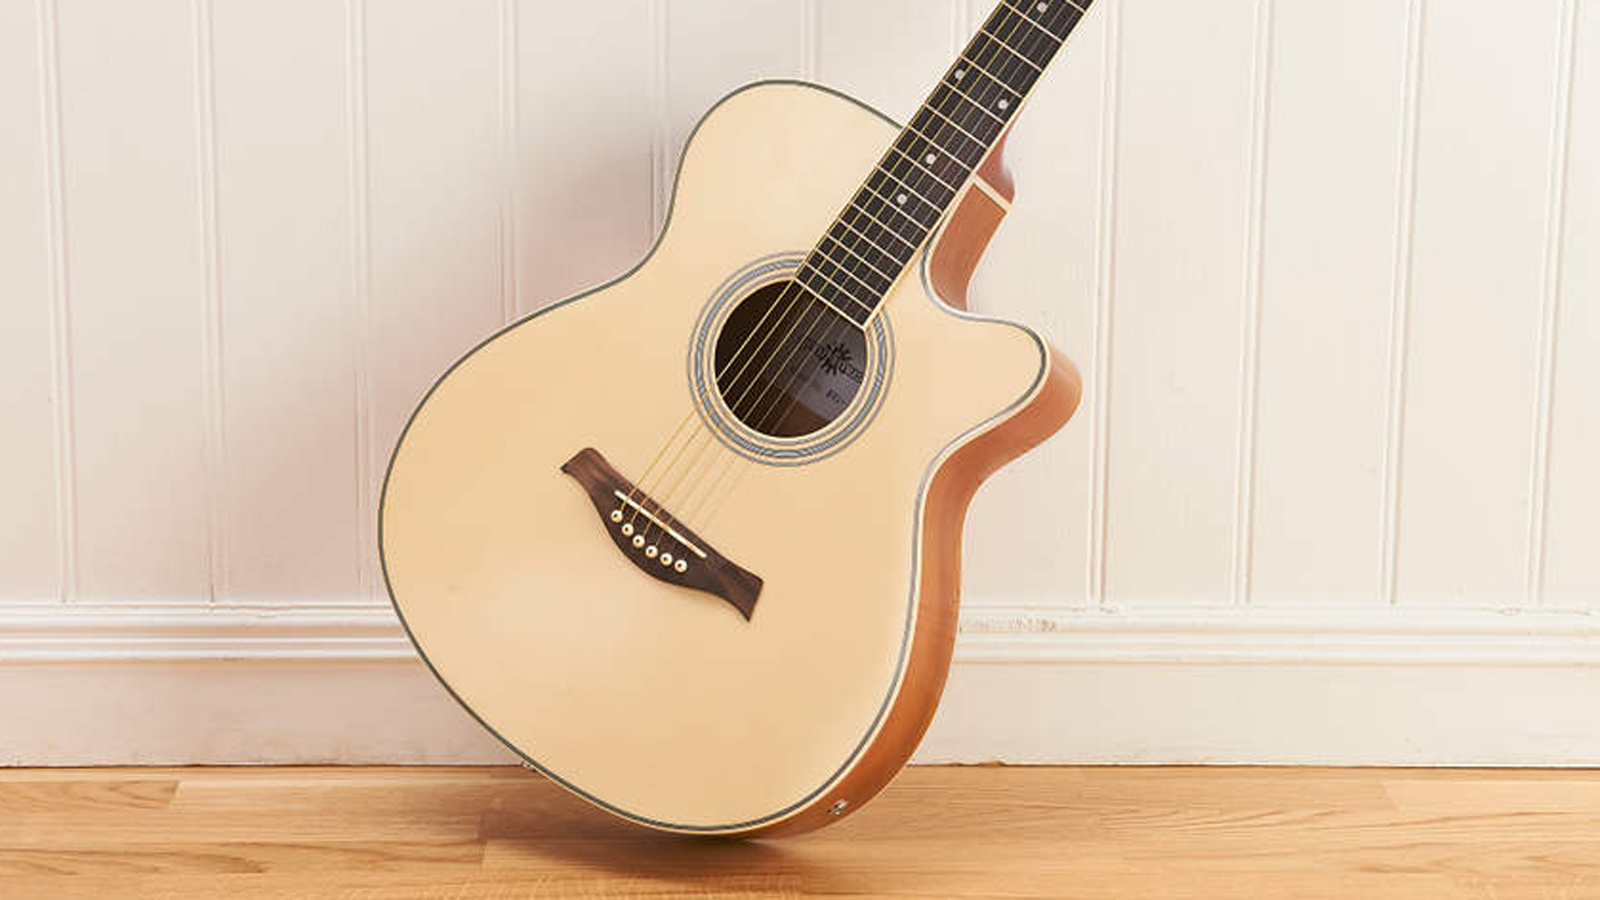 Natural Jumbo Electro Acoustic Guitar by Gear4music